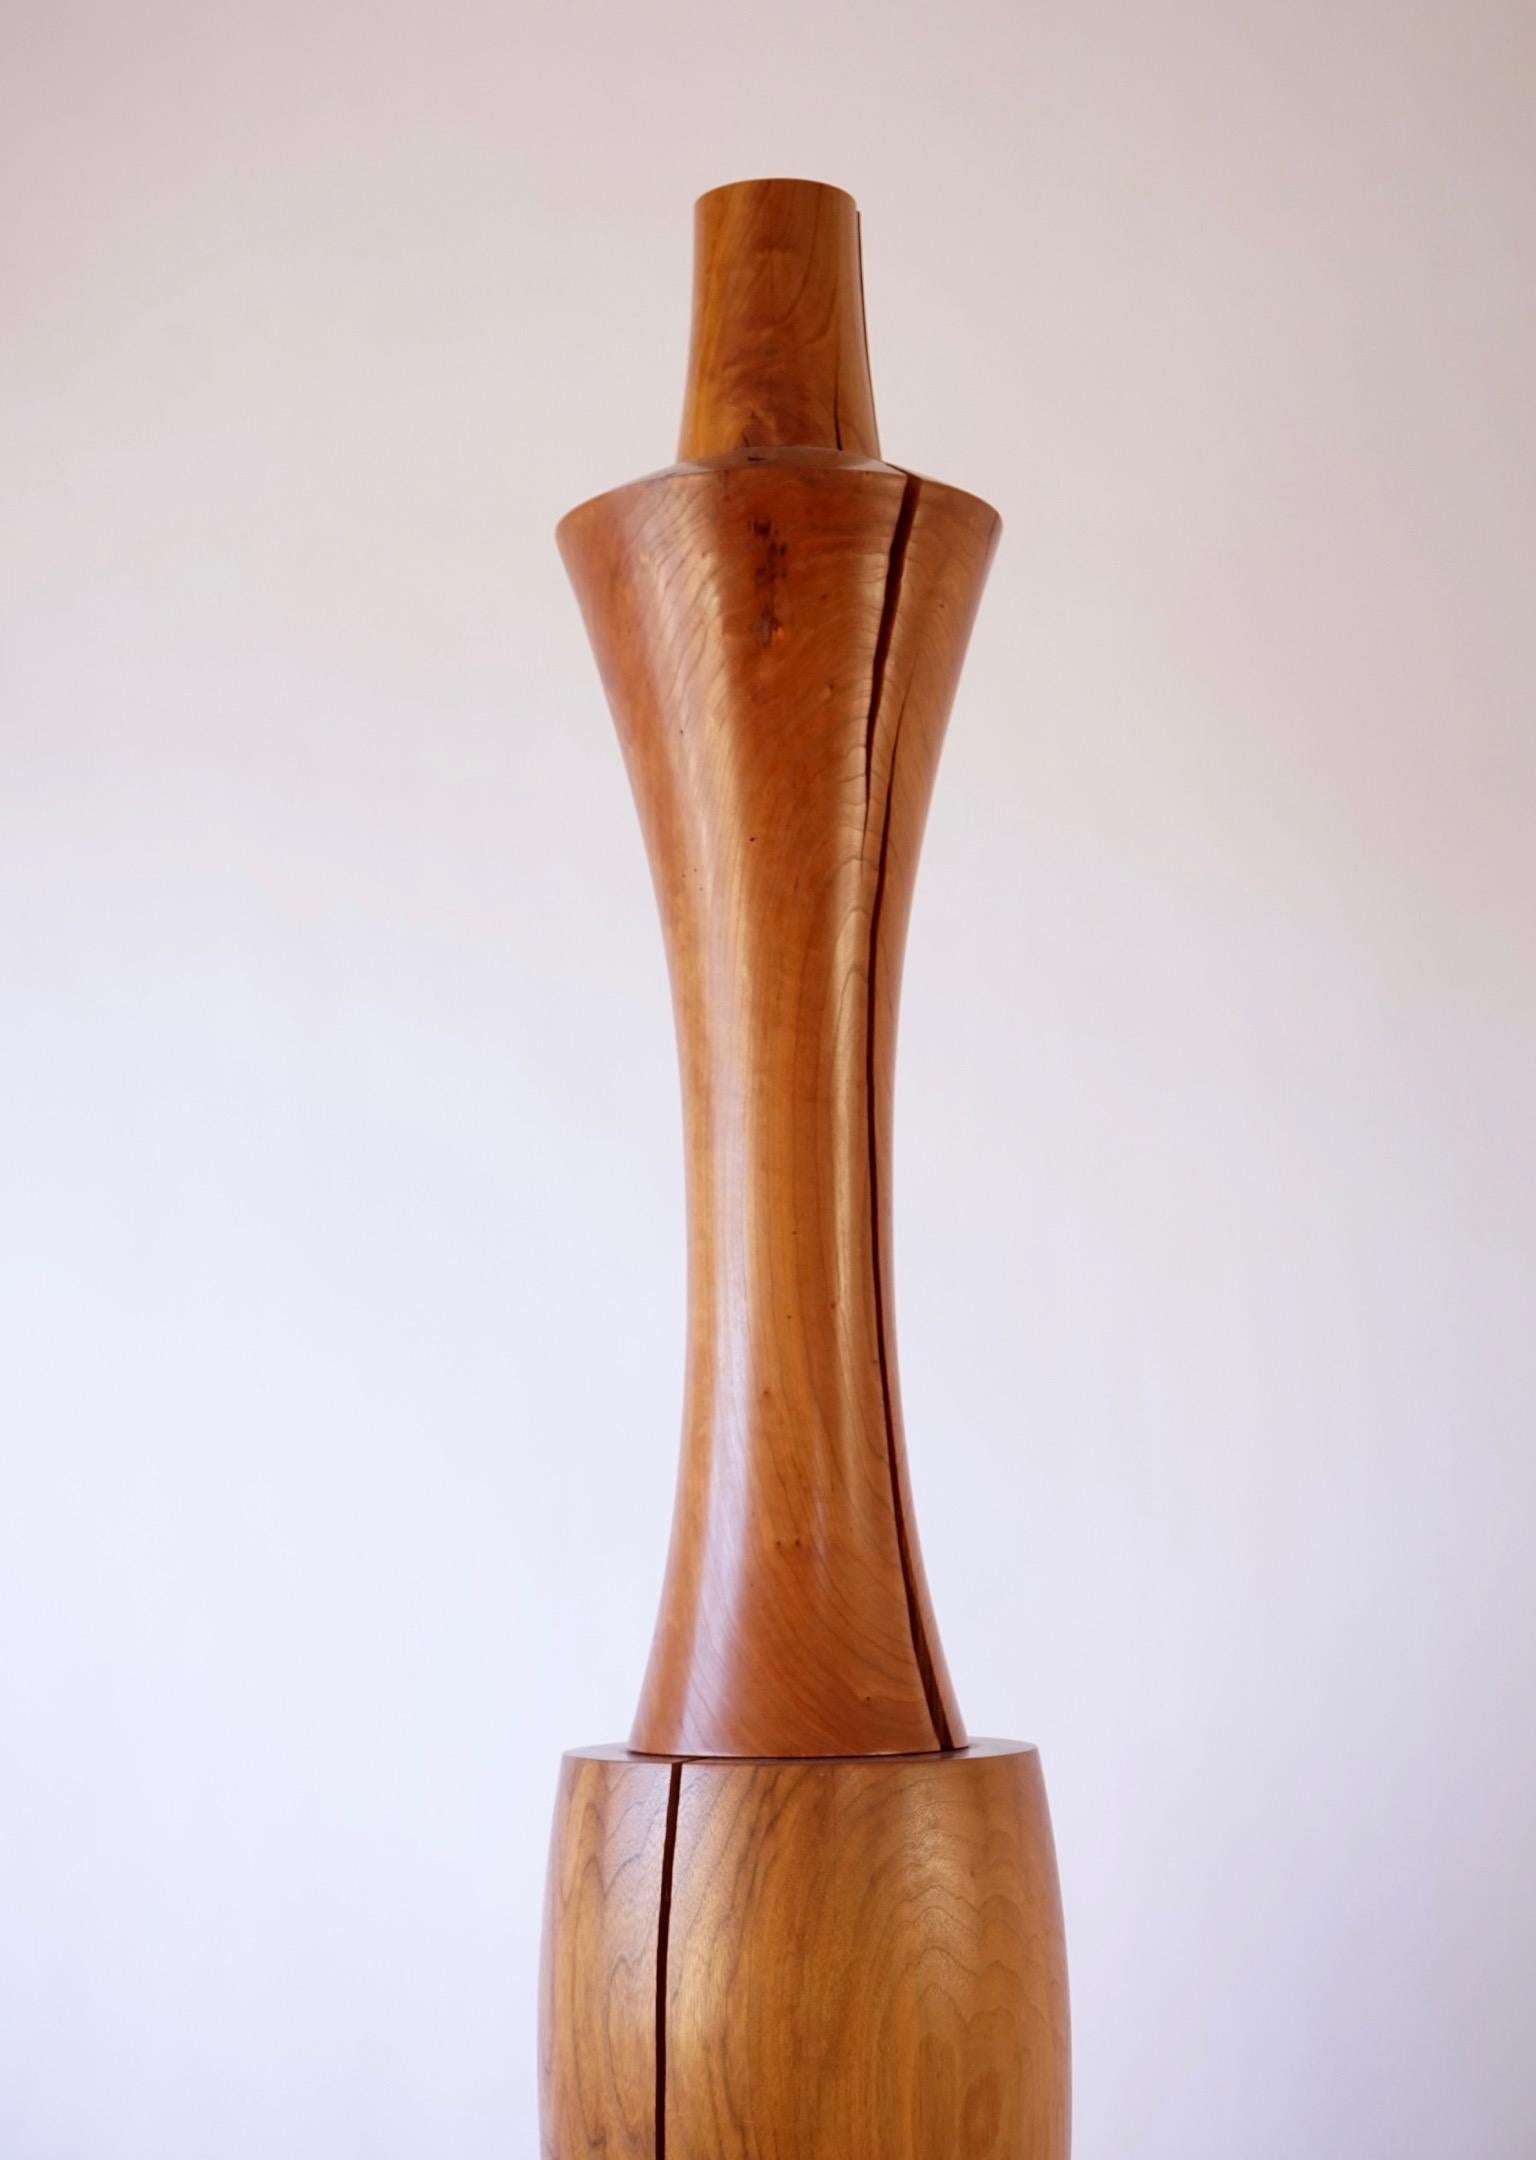 The Totem #2 was made on a custom built lathe in the Lehrecke studio and is a modern take on the Totem tradition. Turned by a master craftsman with locally sourced walnut and cherry.  Totem #2 is turned in three sections with a 1 1/4